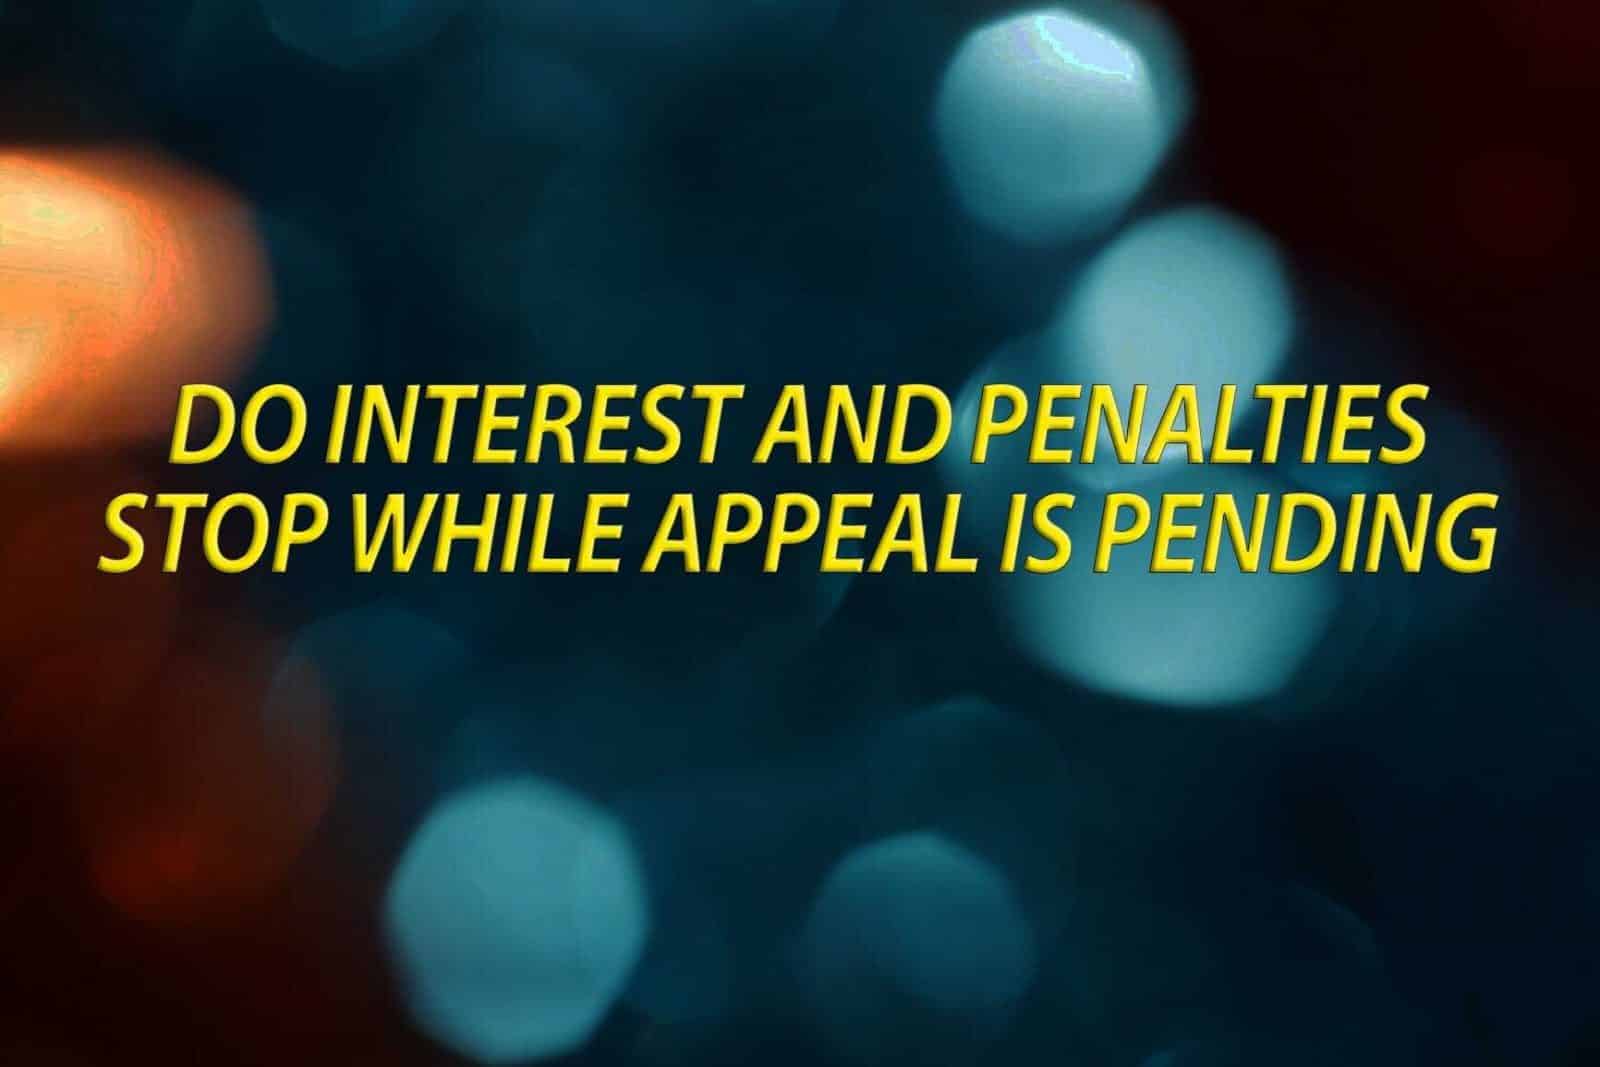 Do interest an penalties stop while appeal is pending